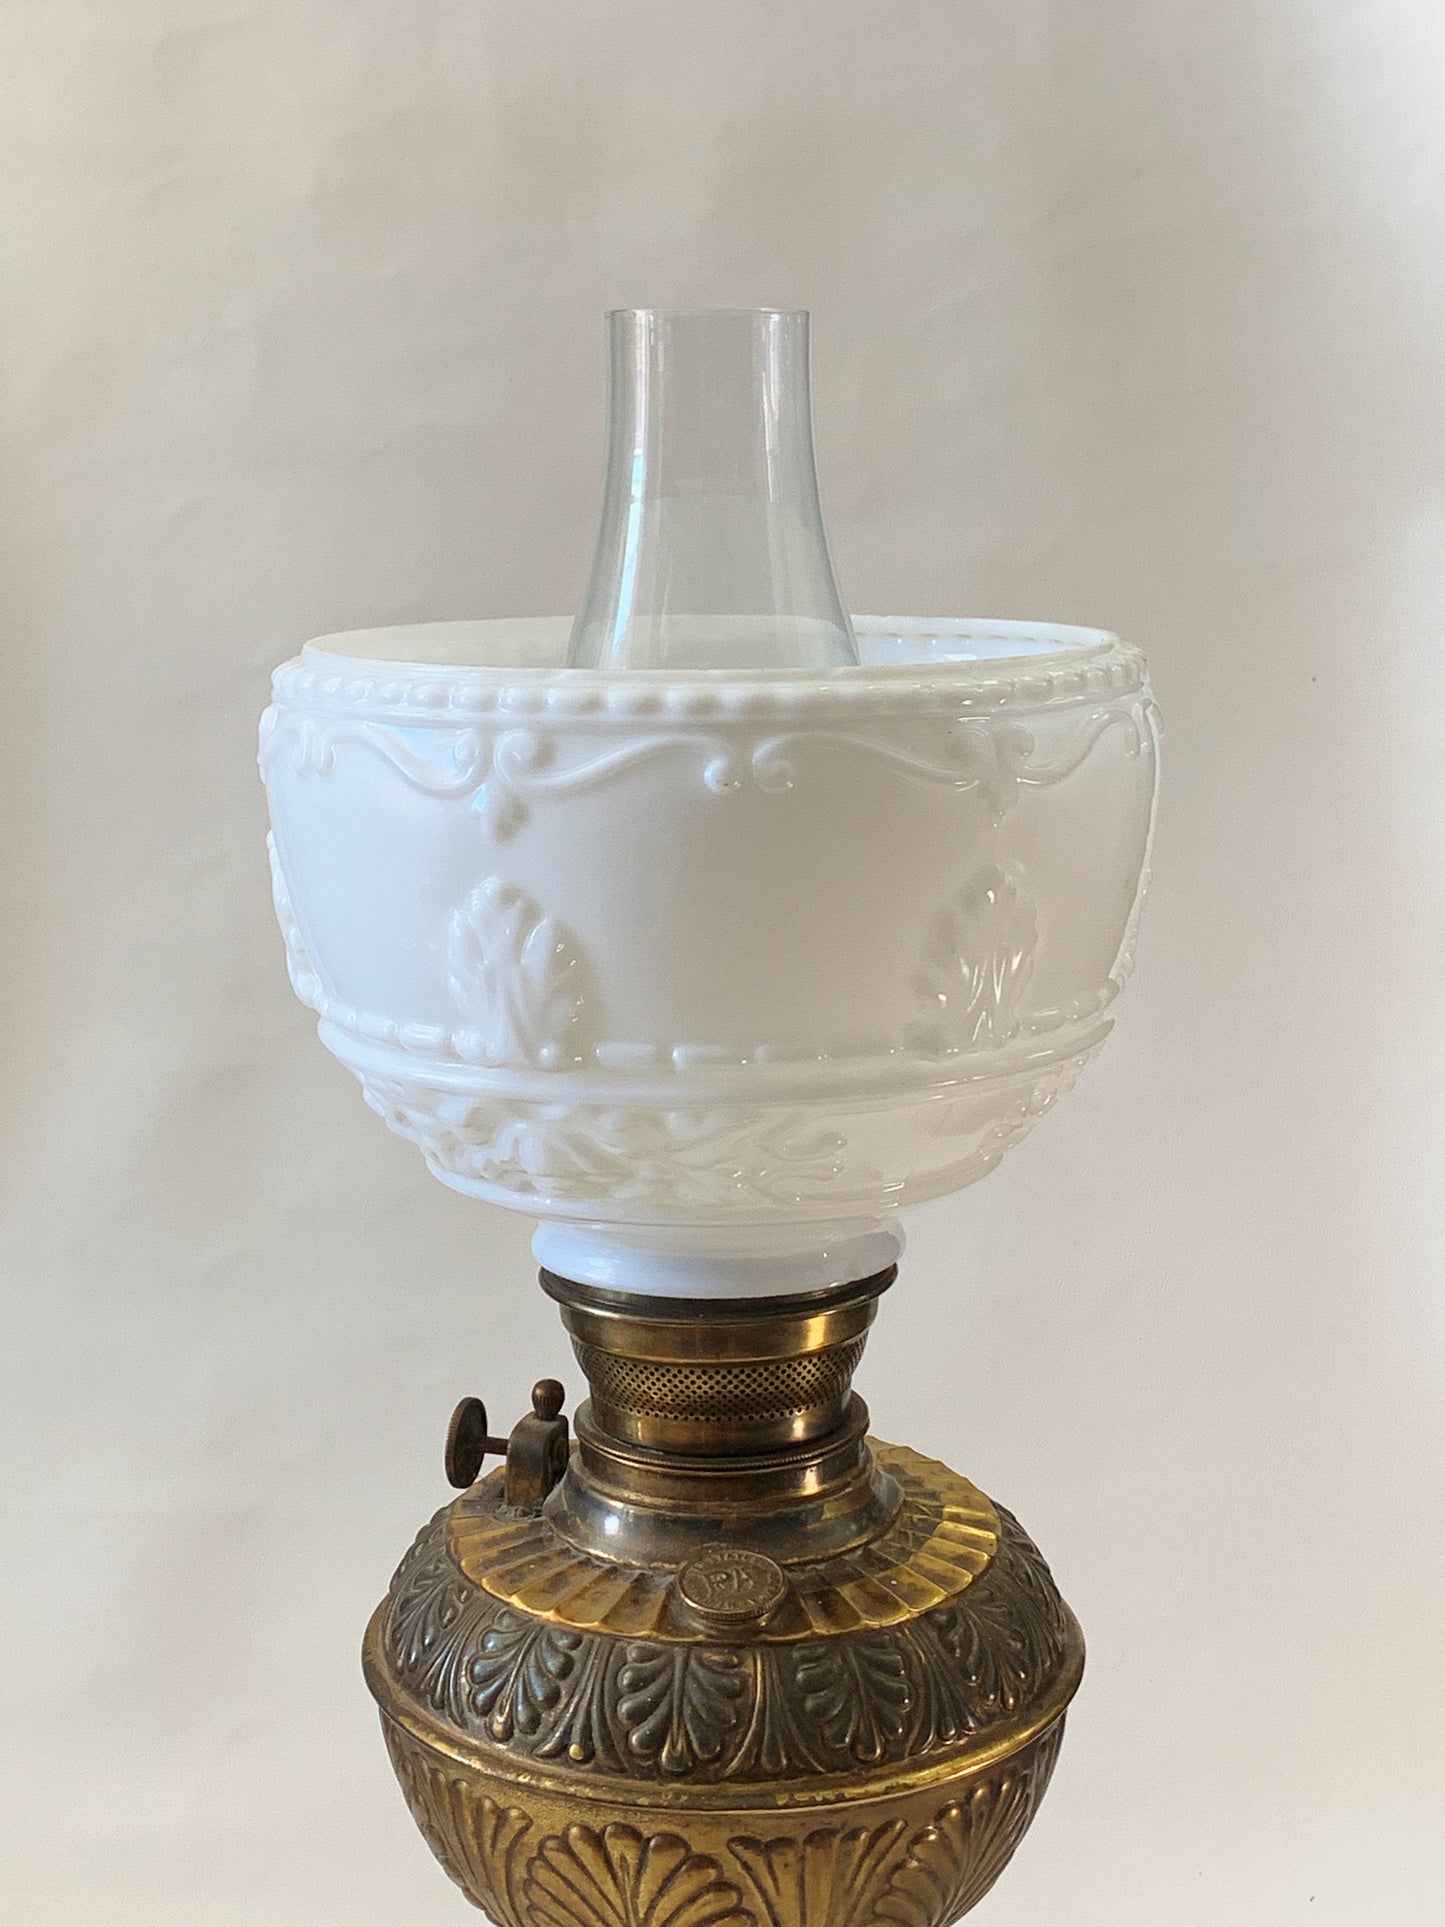 Antique Plume and Atwood Kerosene Lamp with milk glass shade